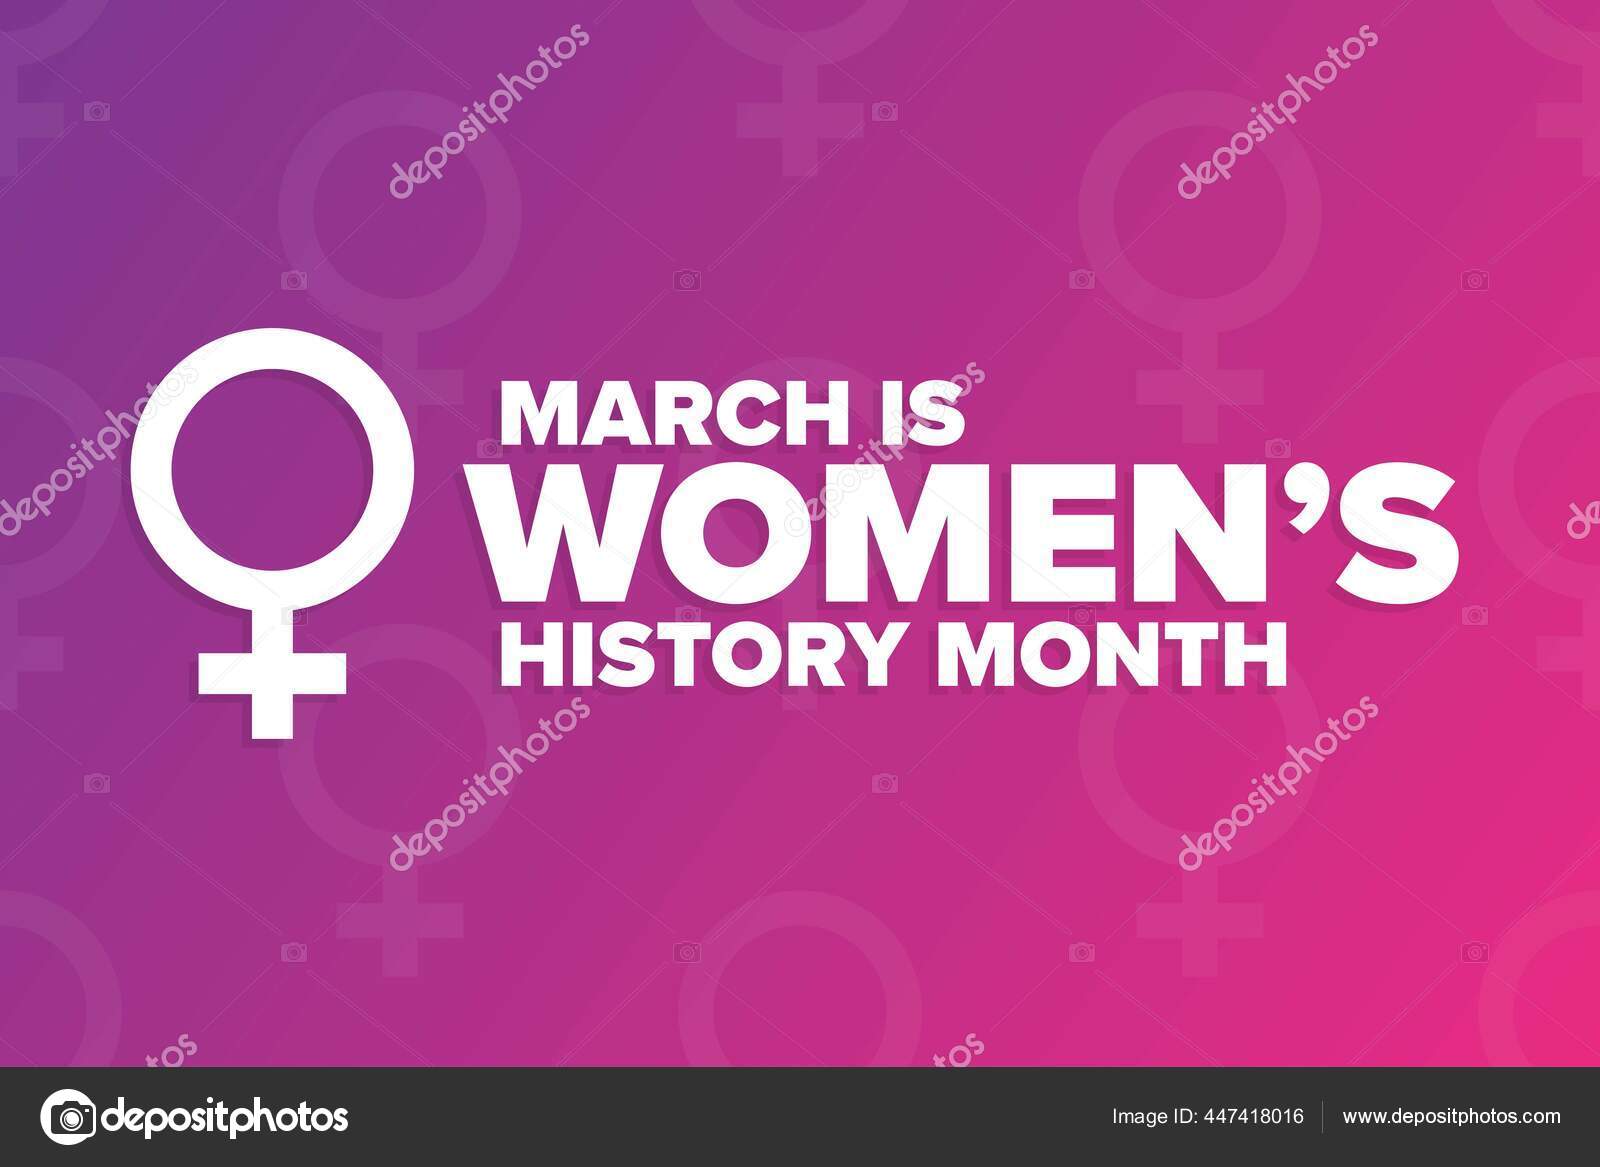 558 Women's history month Vector Images | Depositphotos